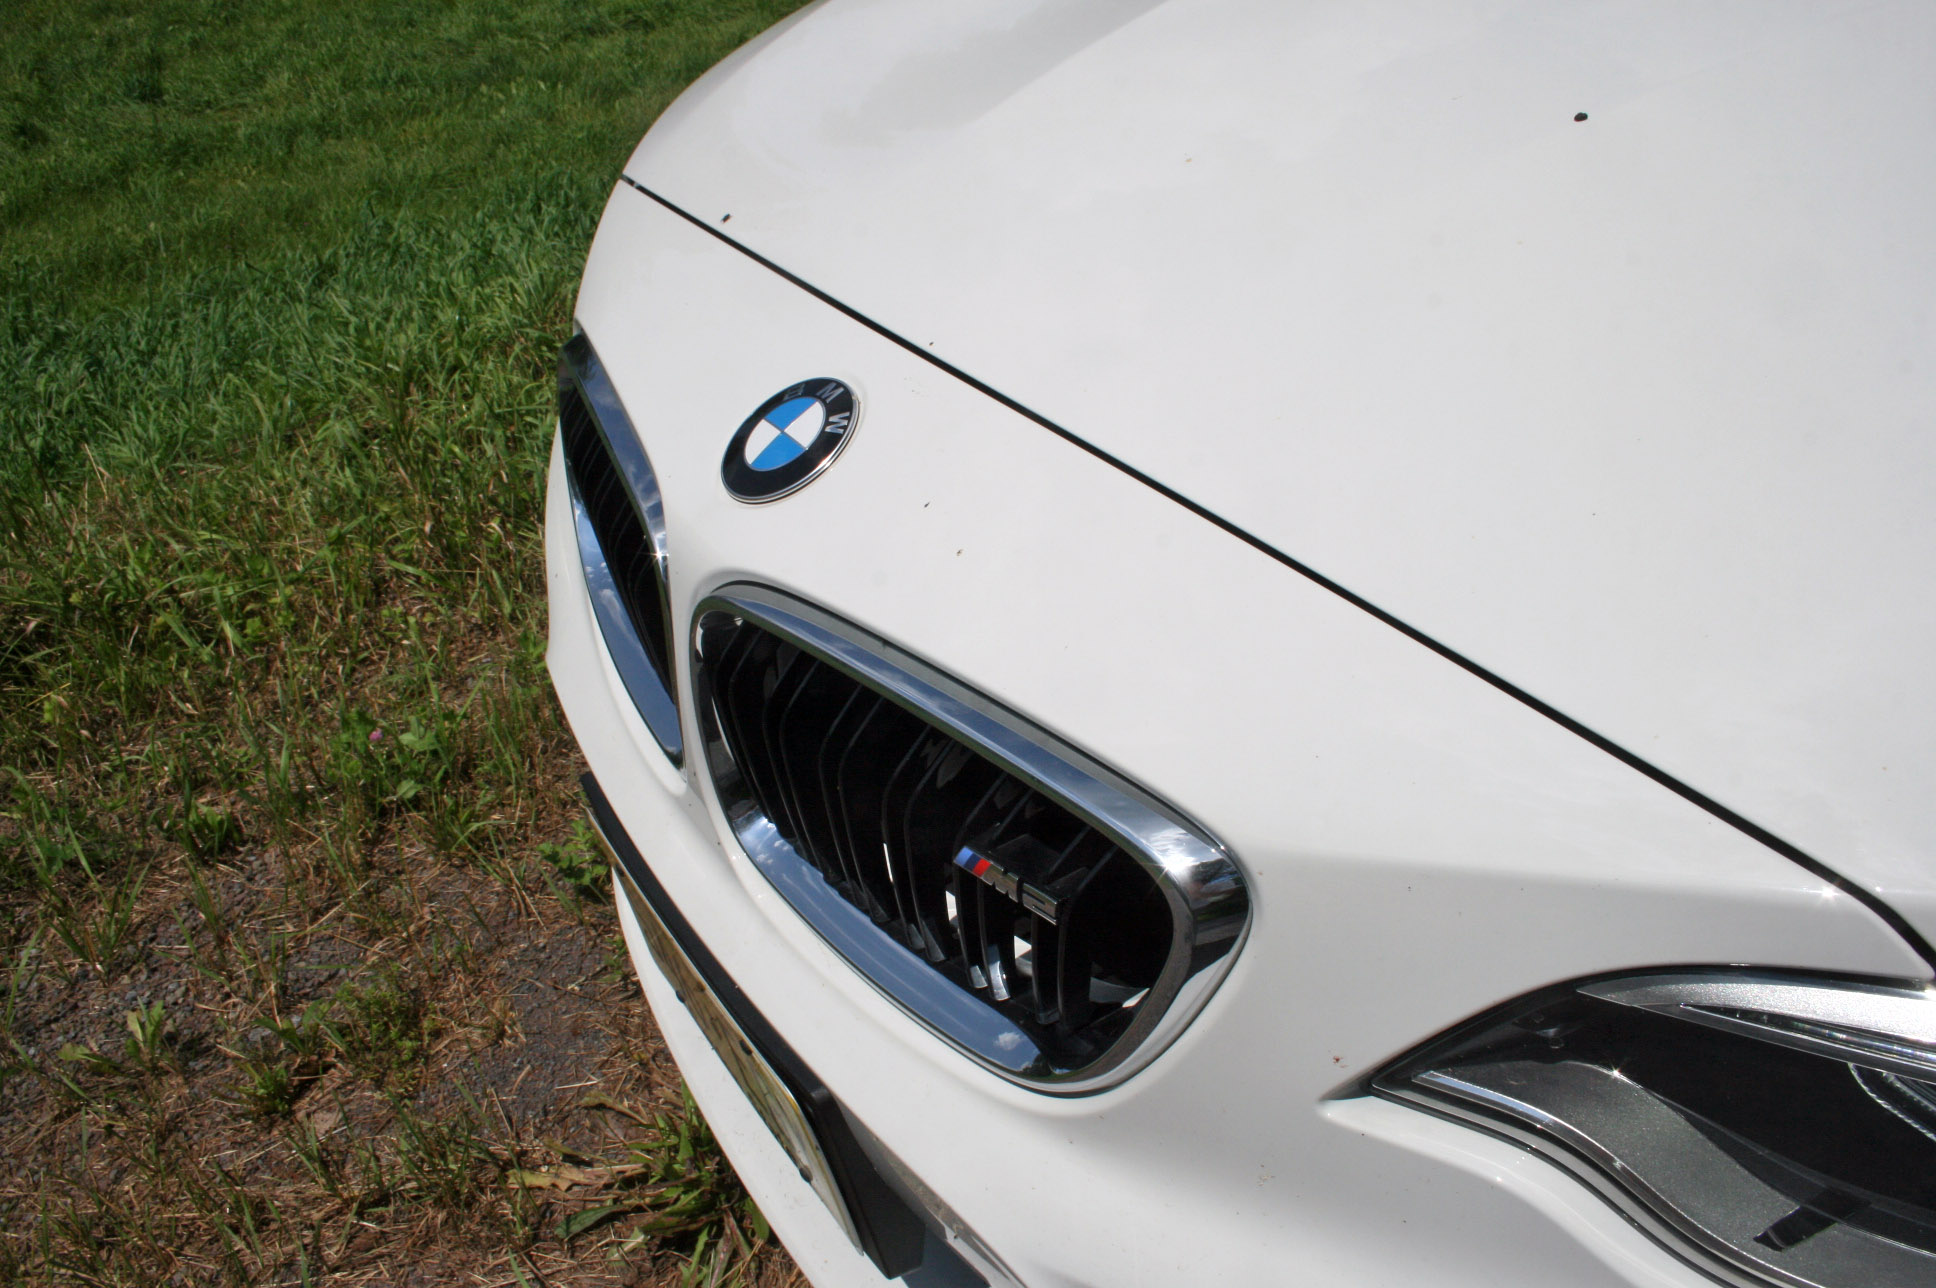 The 2017 BMW M2 Is Exactly What You Want A Modern M Car To Be